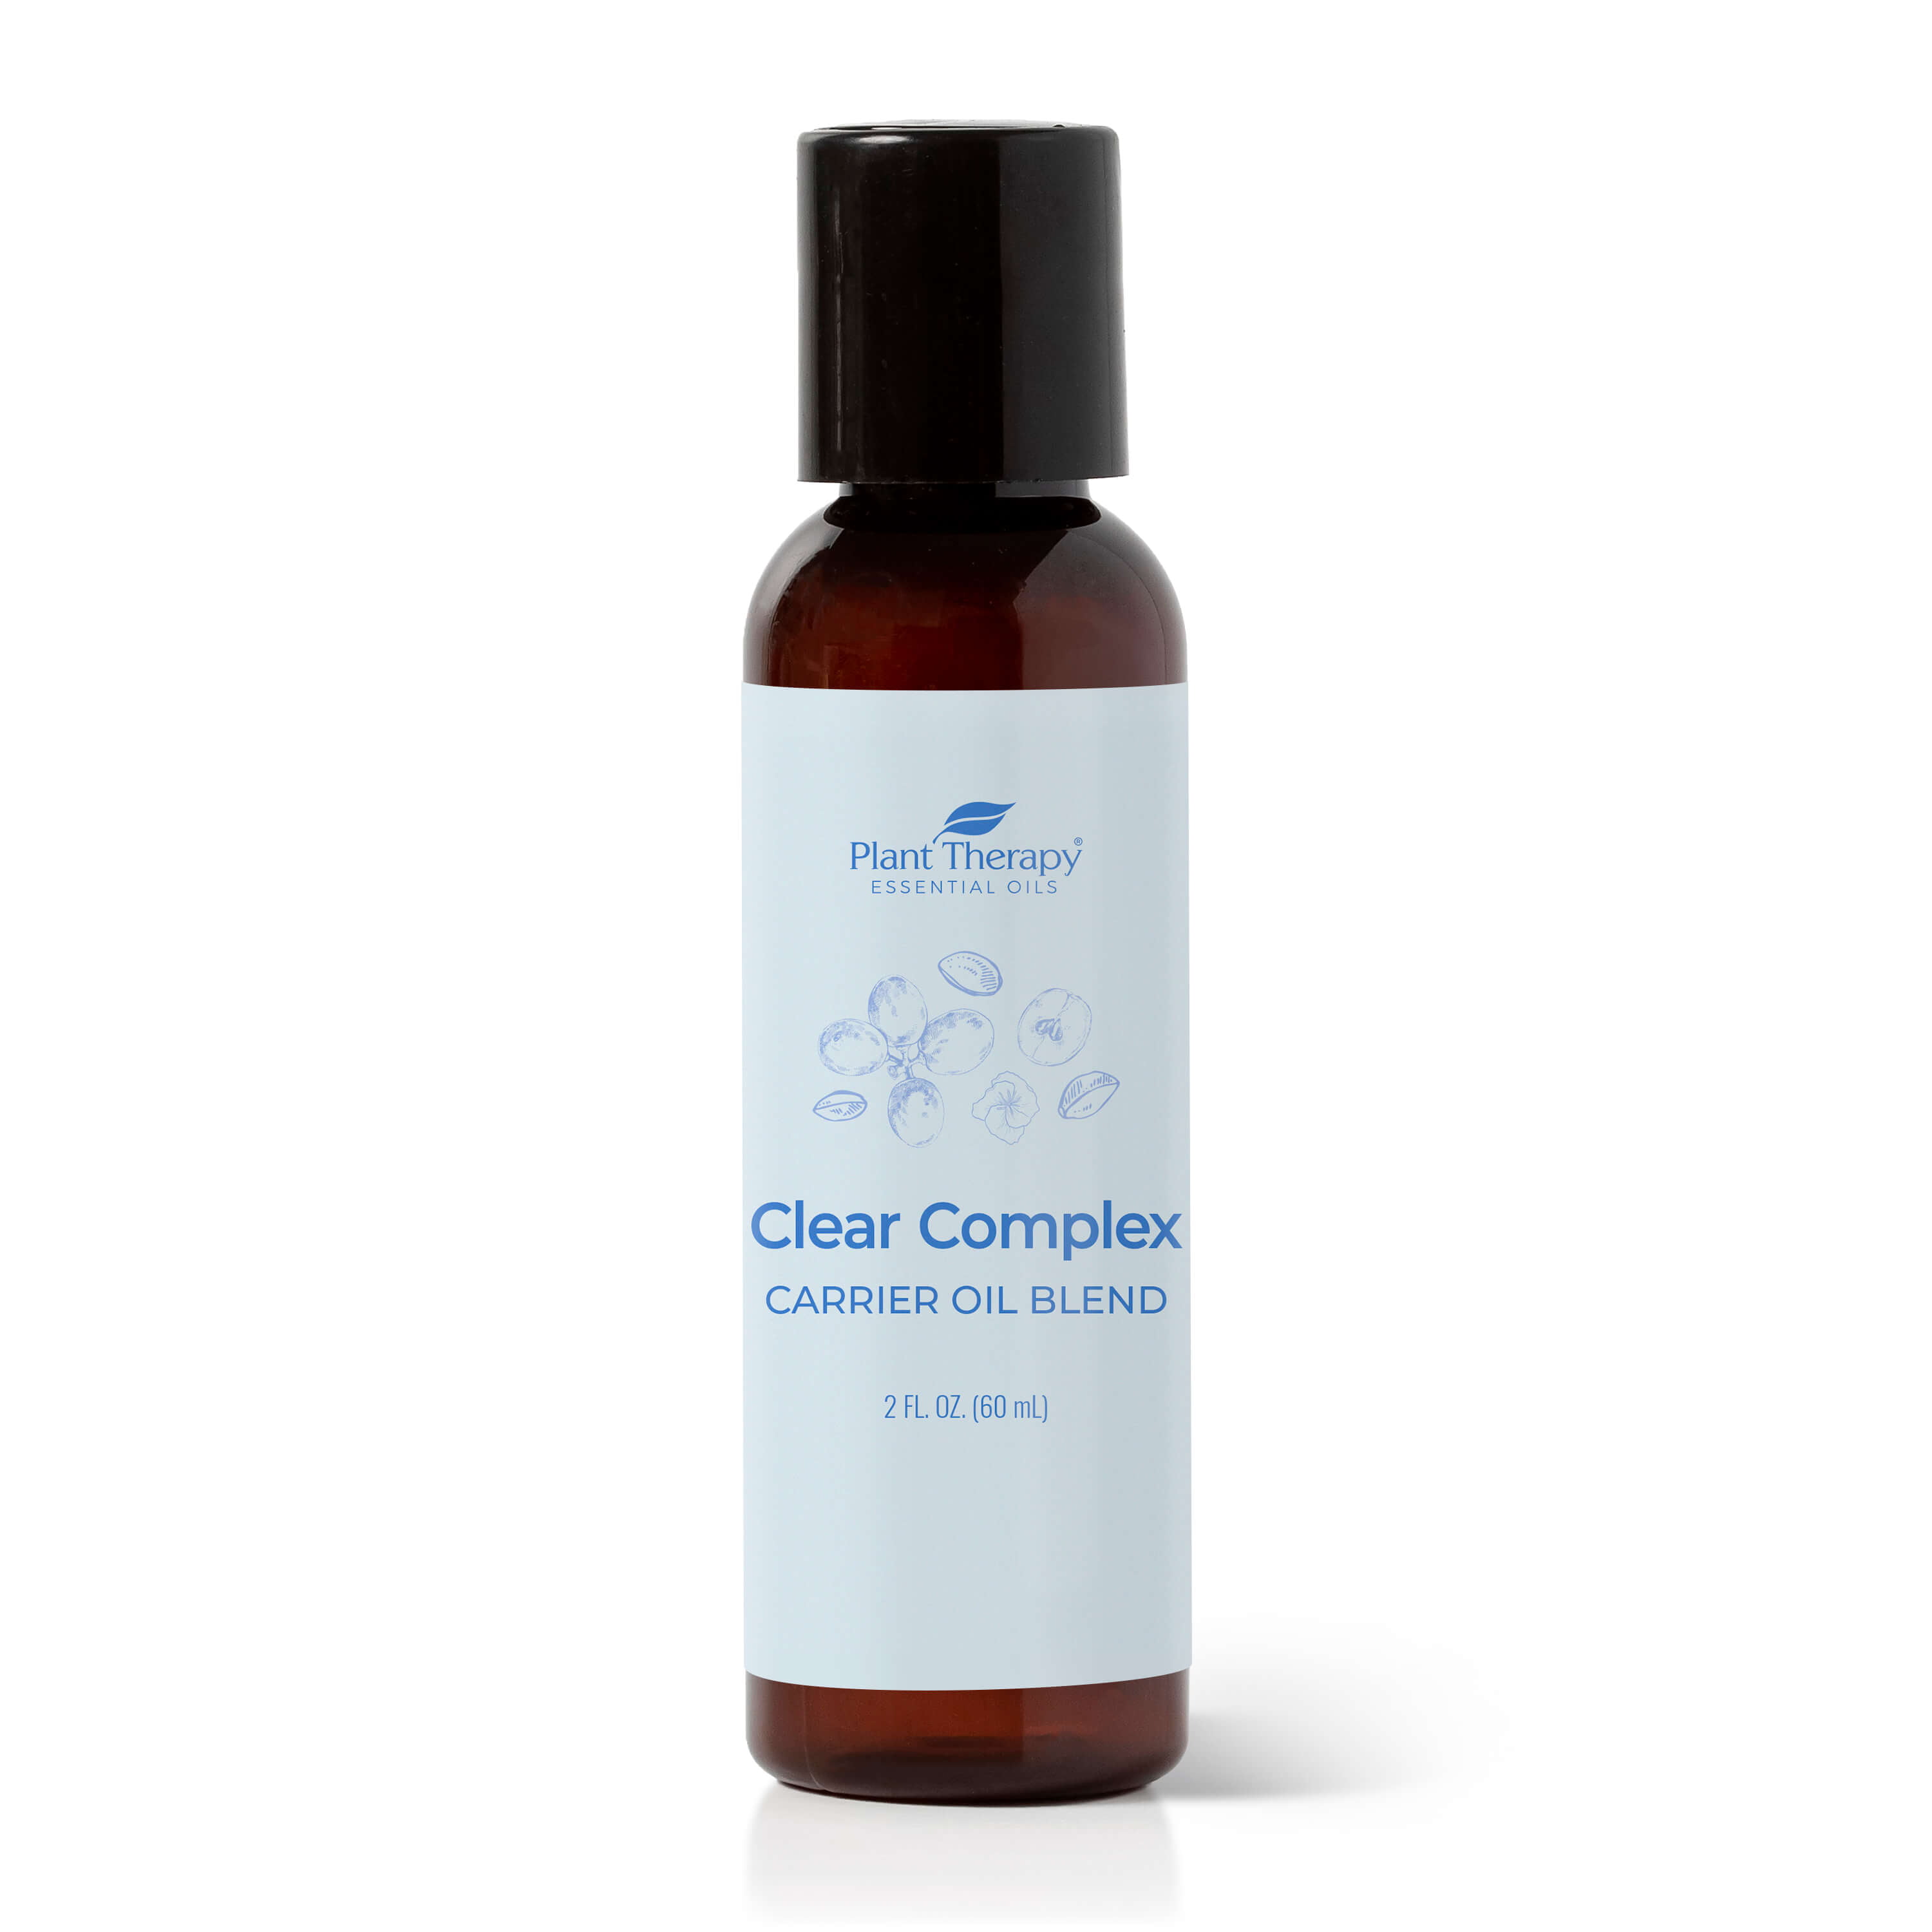 Plant Therapy Clear Complex Carrier Oil Blend 4 oz Base for